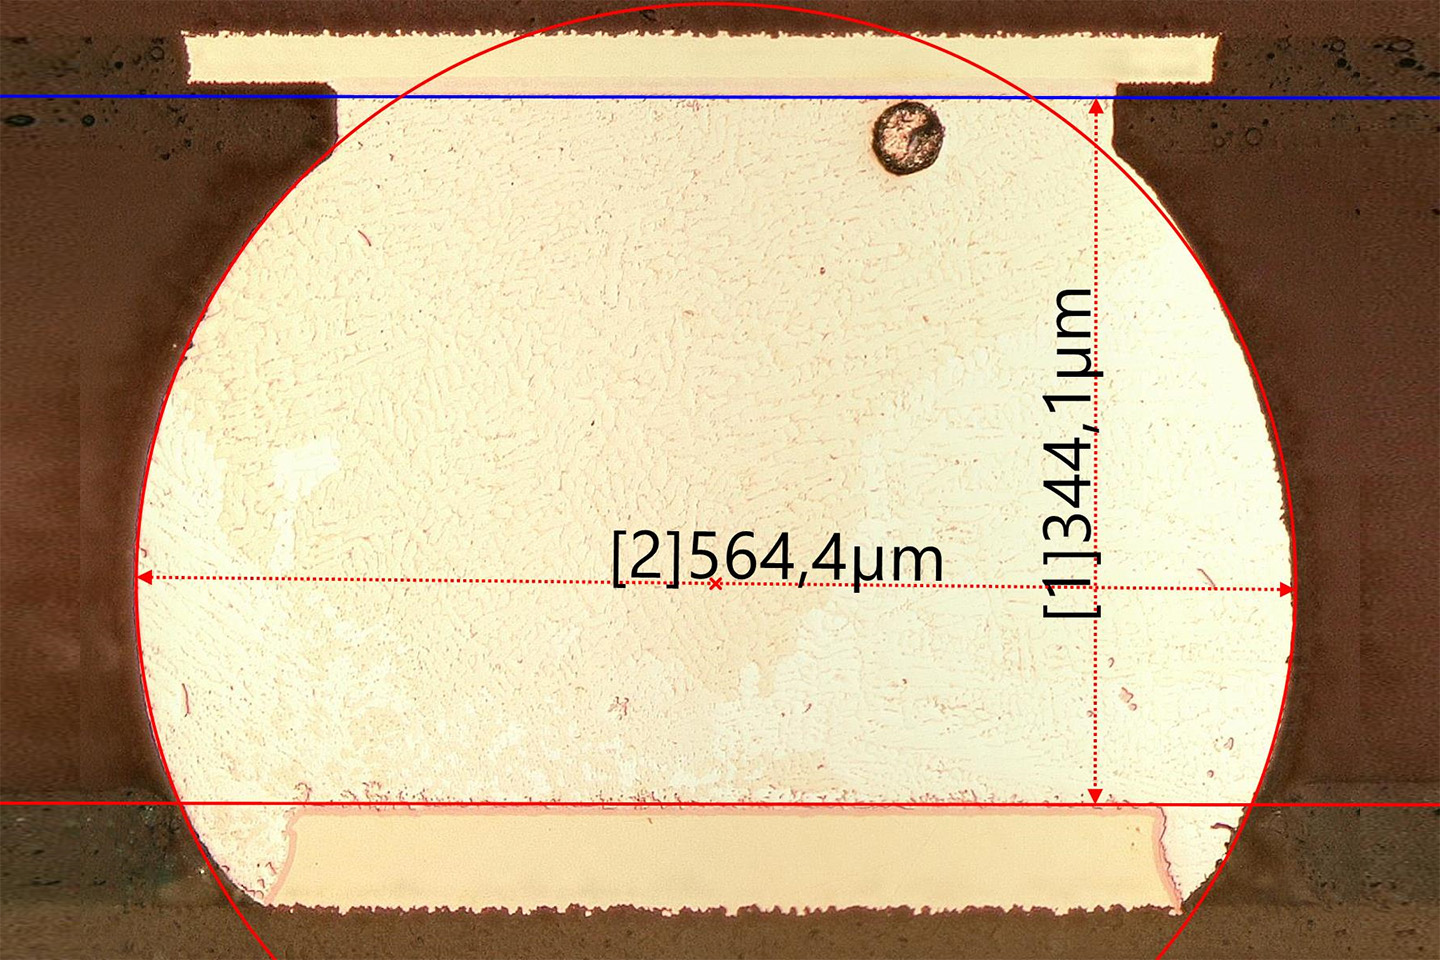 Measured solder contact on micrograph.